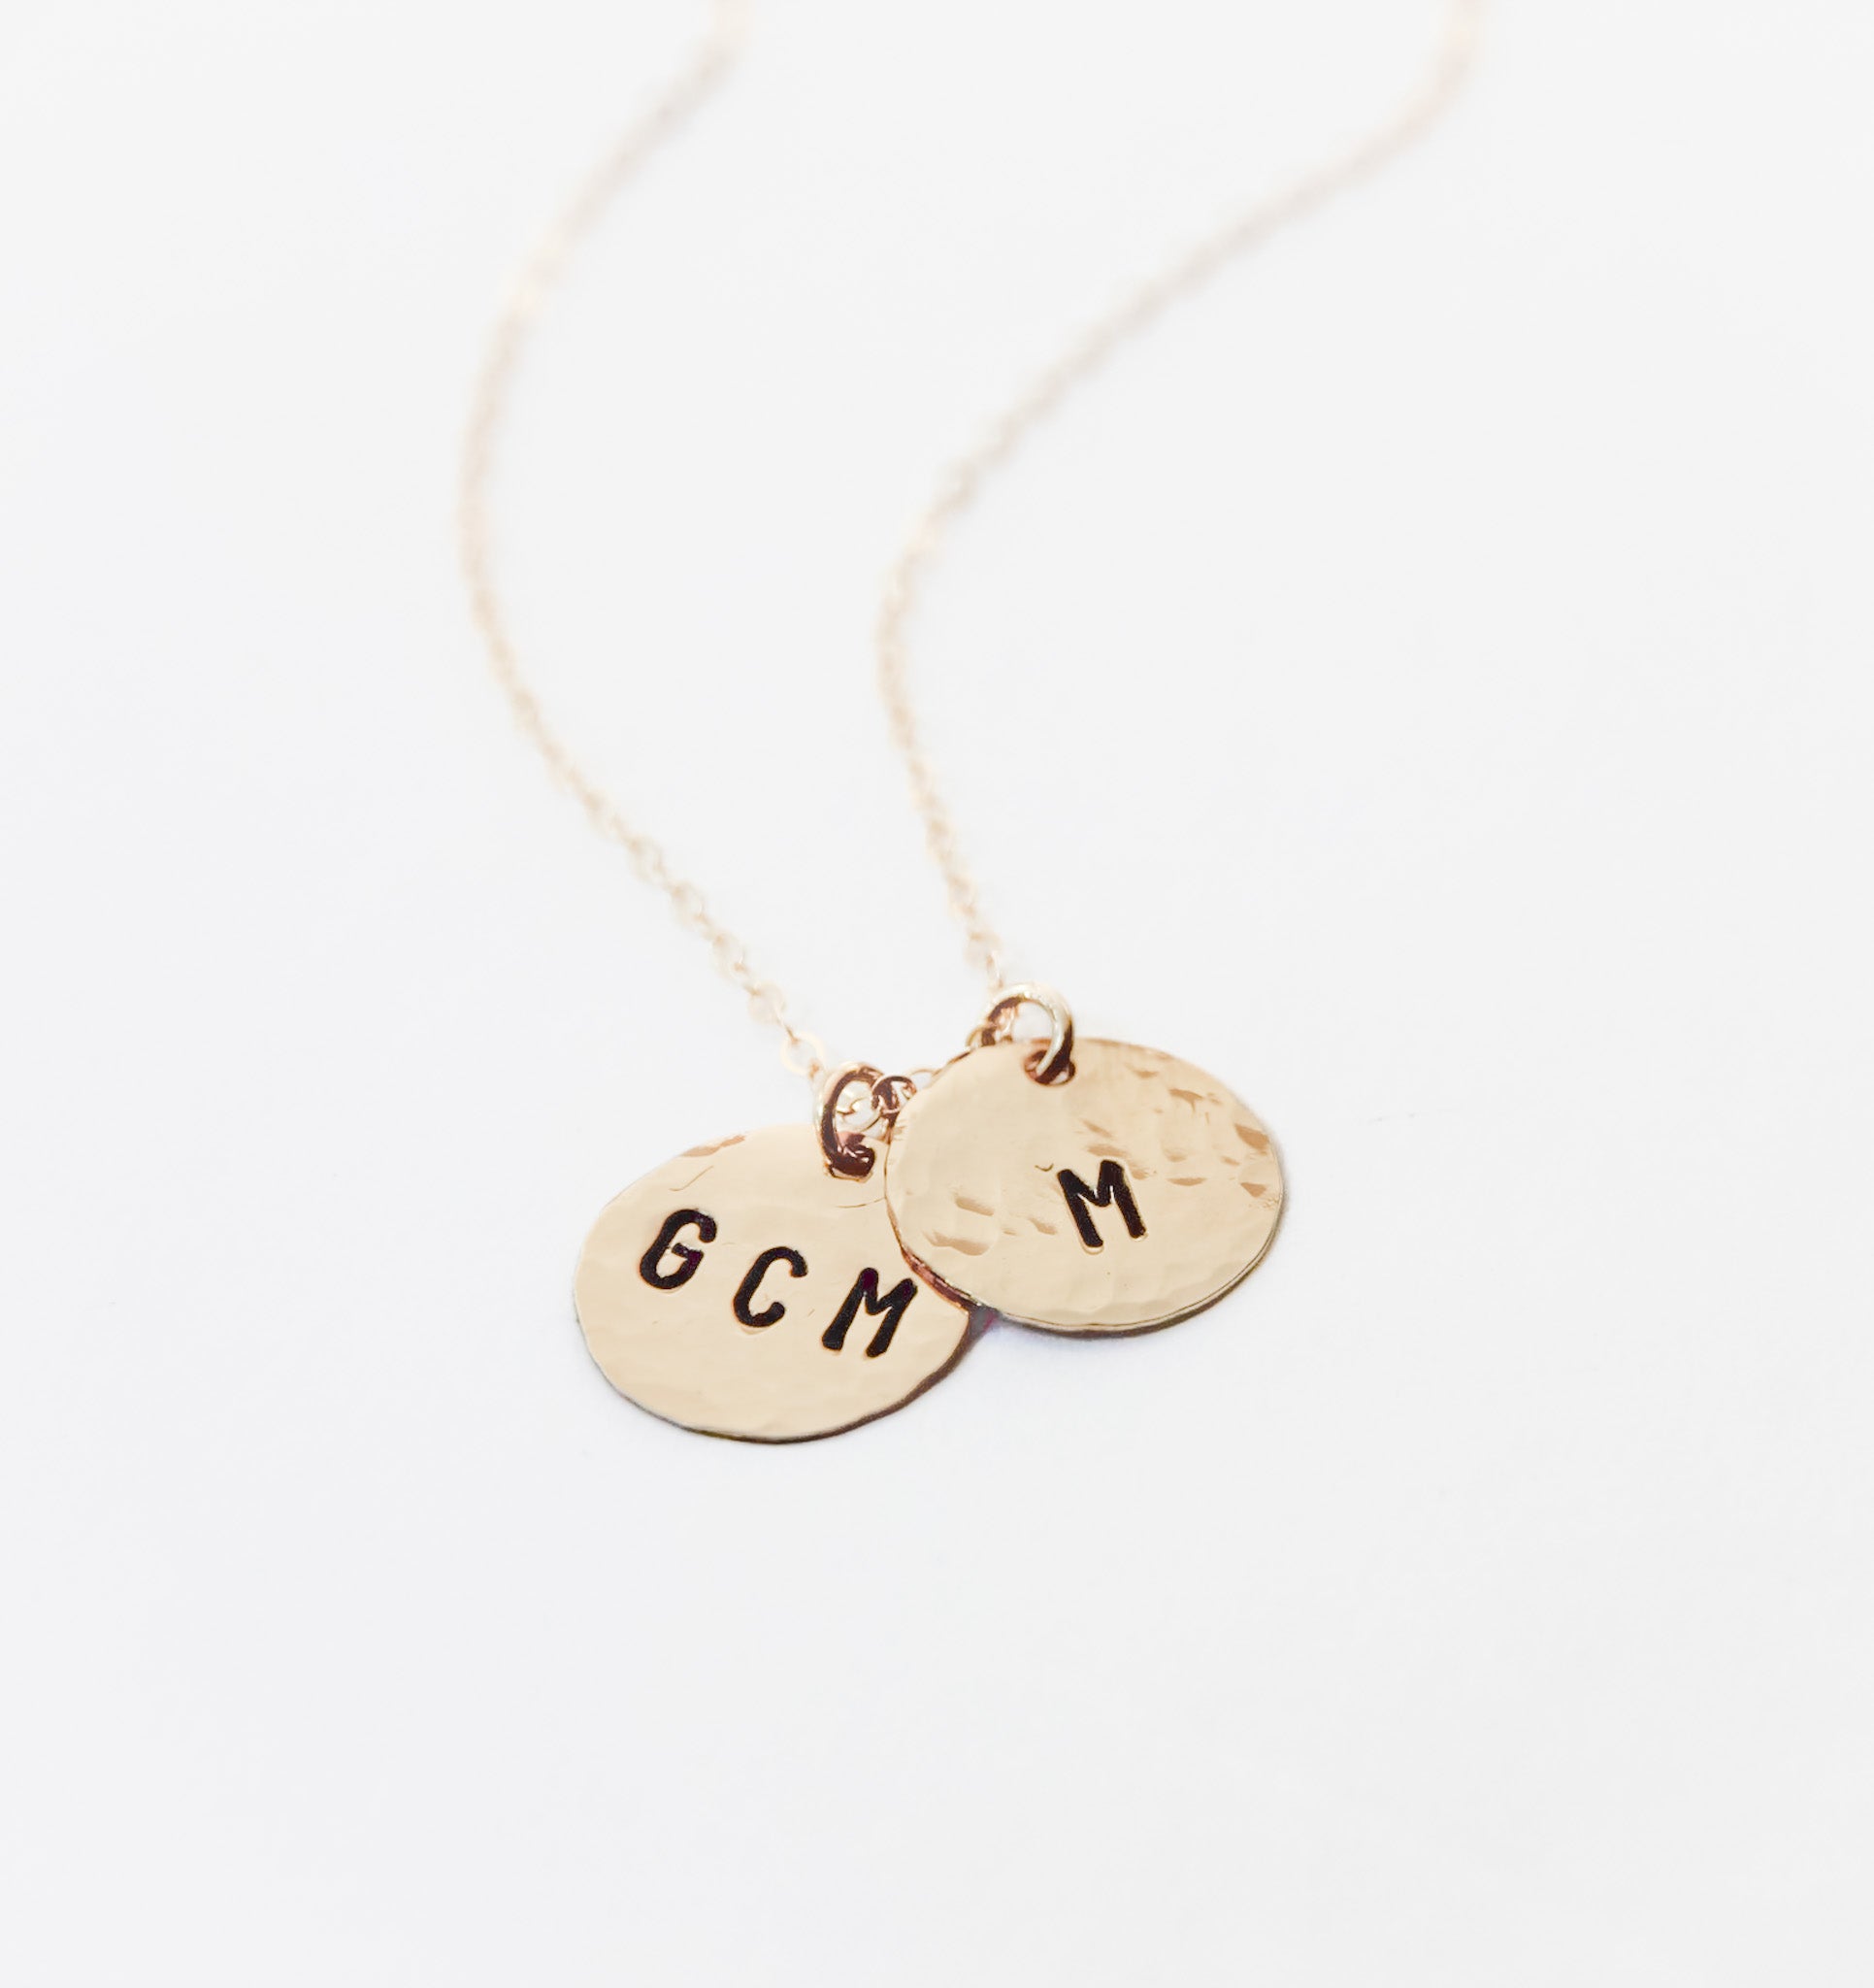 Additional Medium Hand-Stamped Initial Charm